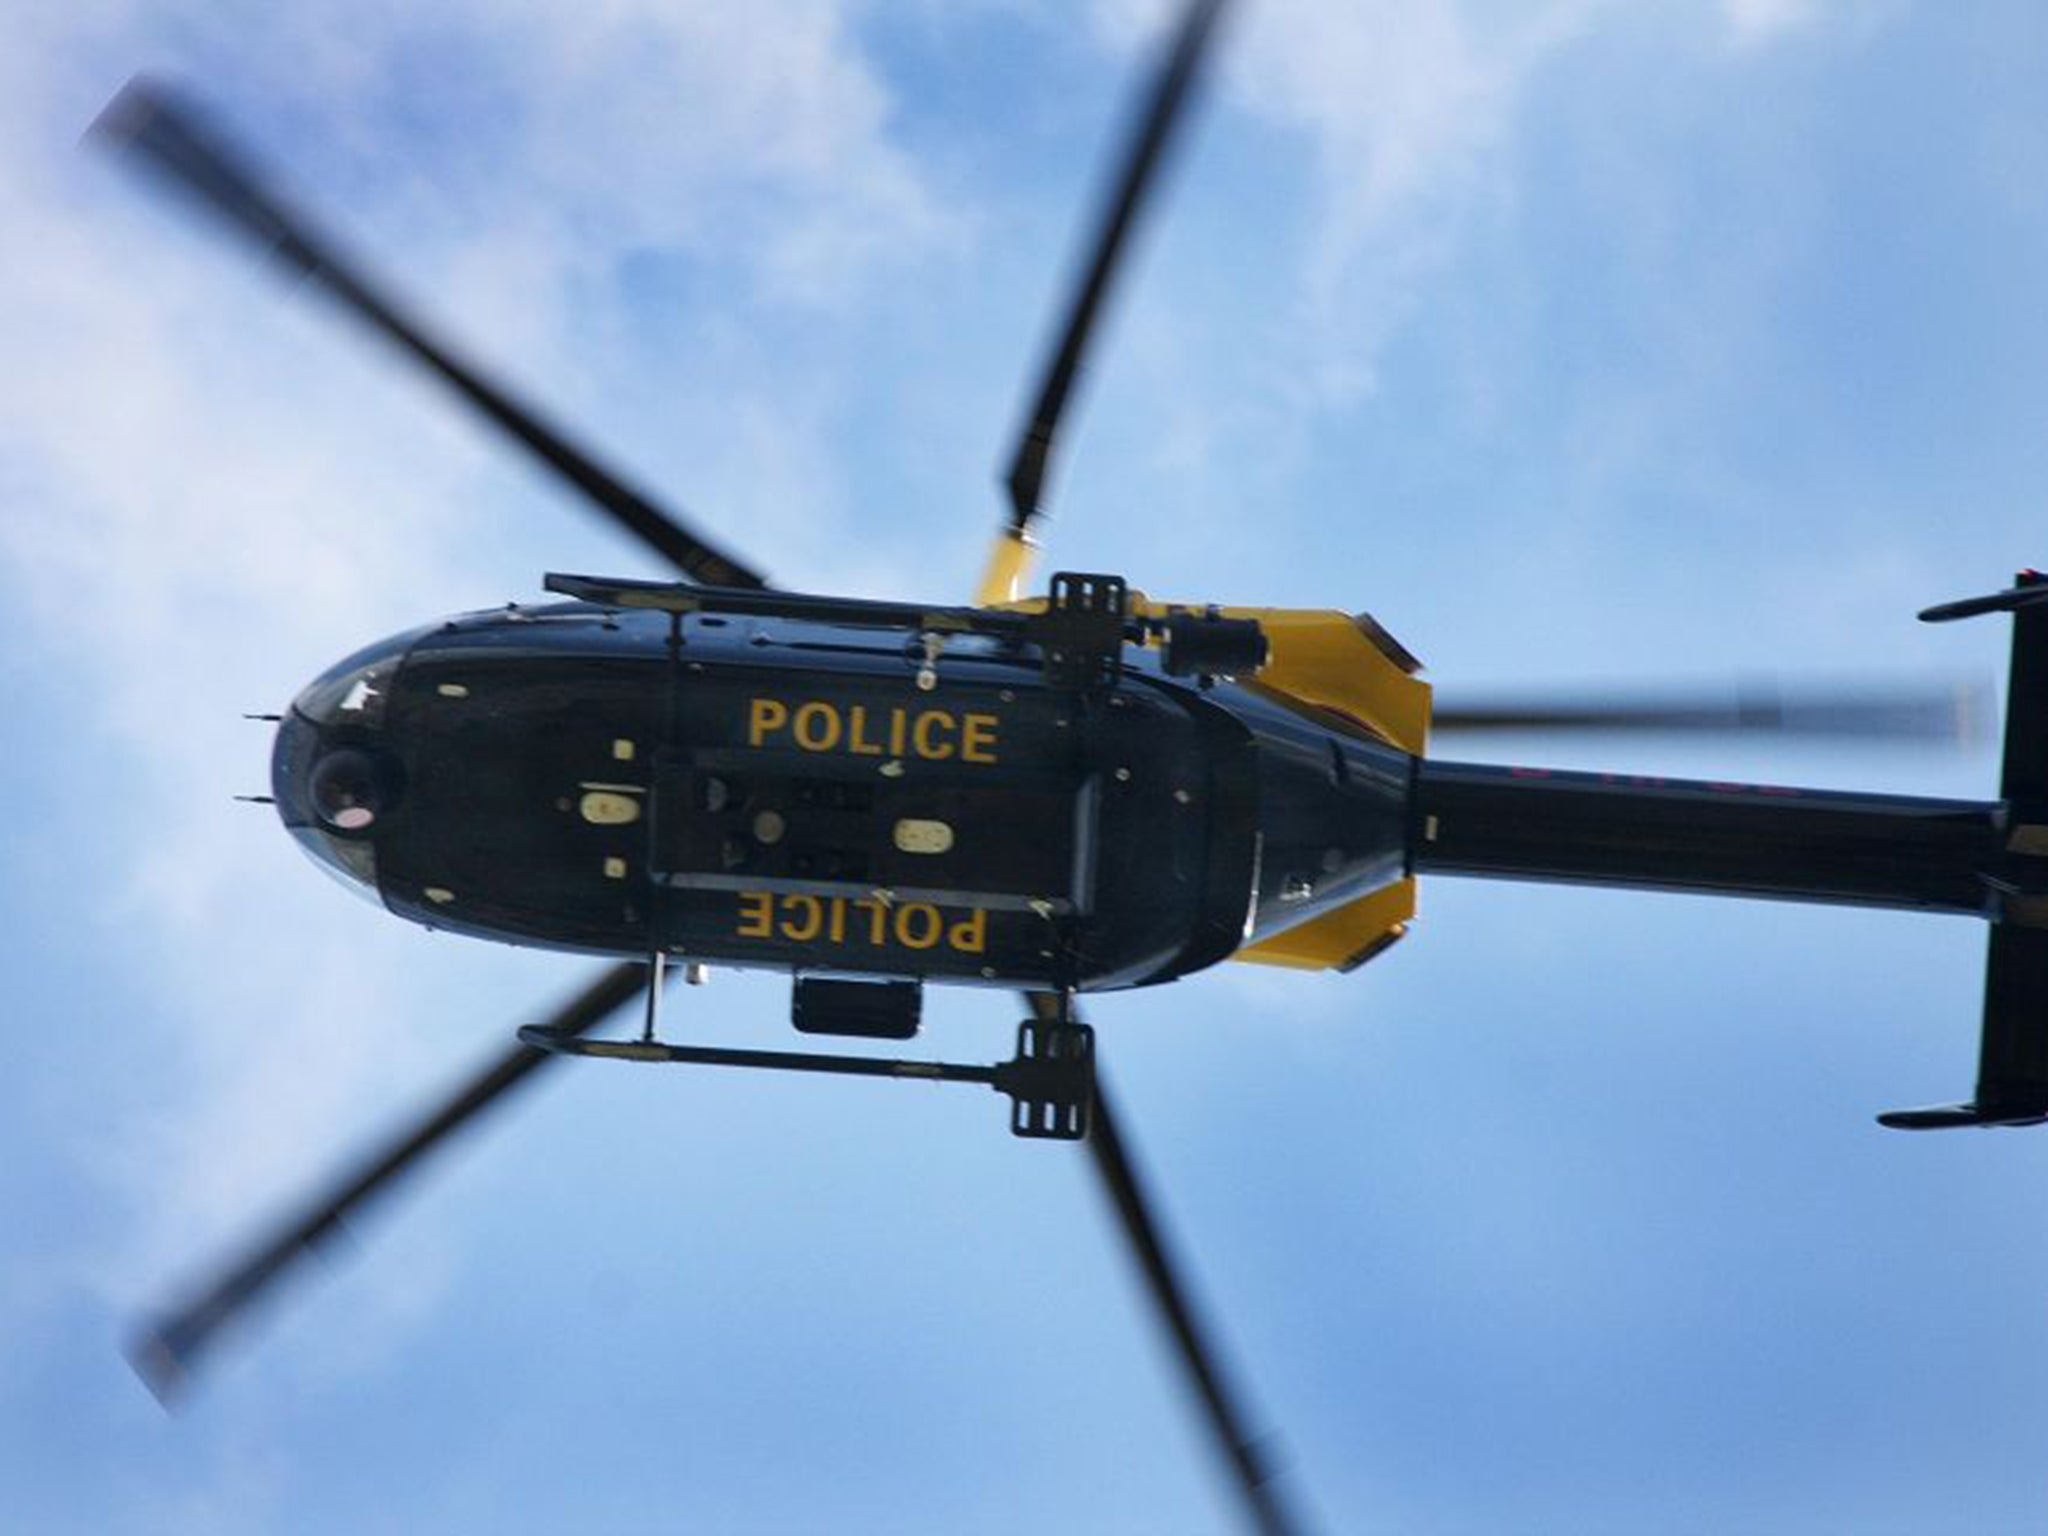 'You may hope that the police helicopter is chasing down criminals and keeping the community safe,' prosecutor says